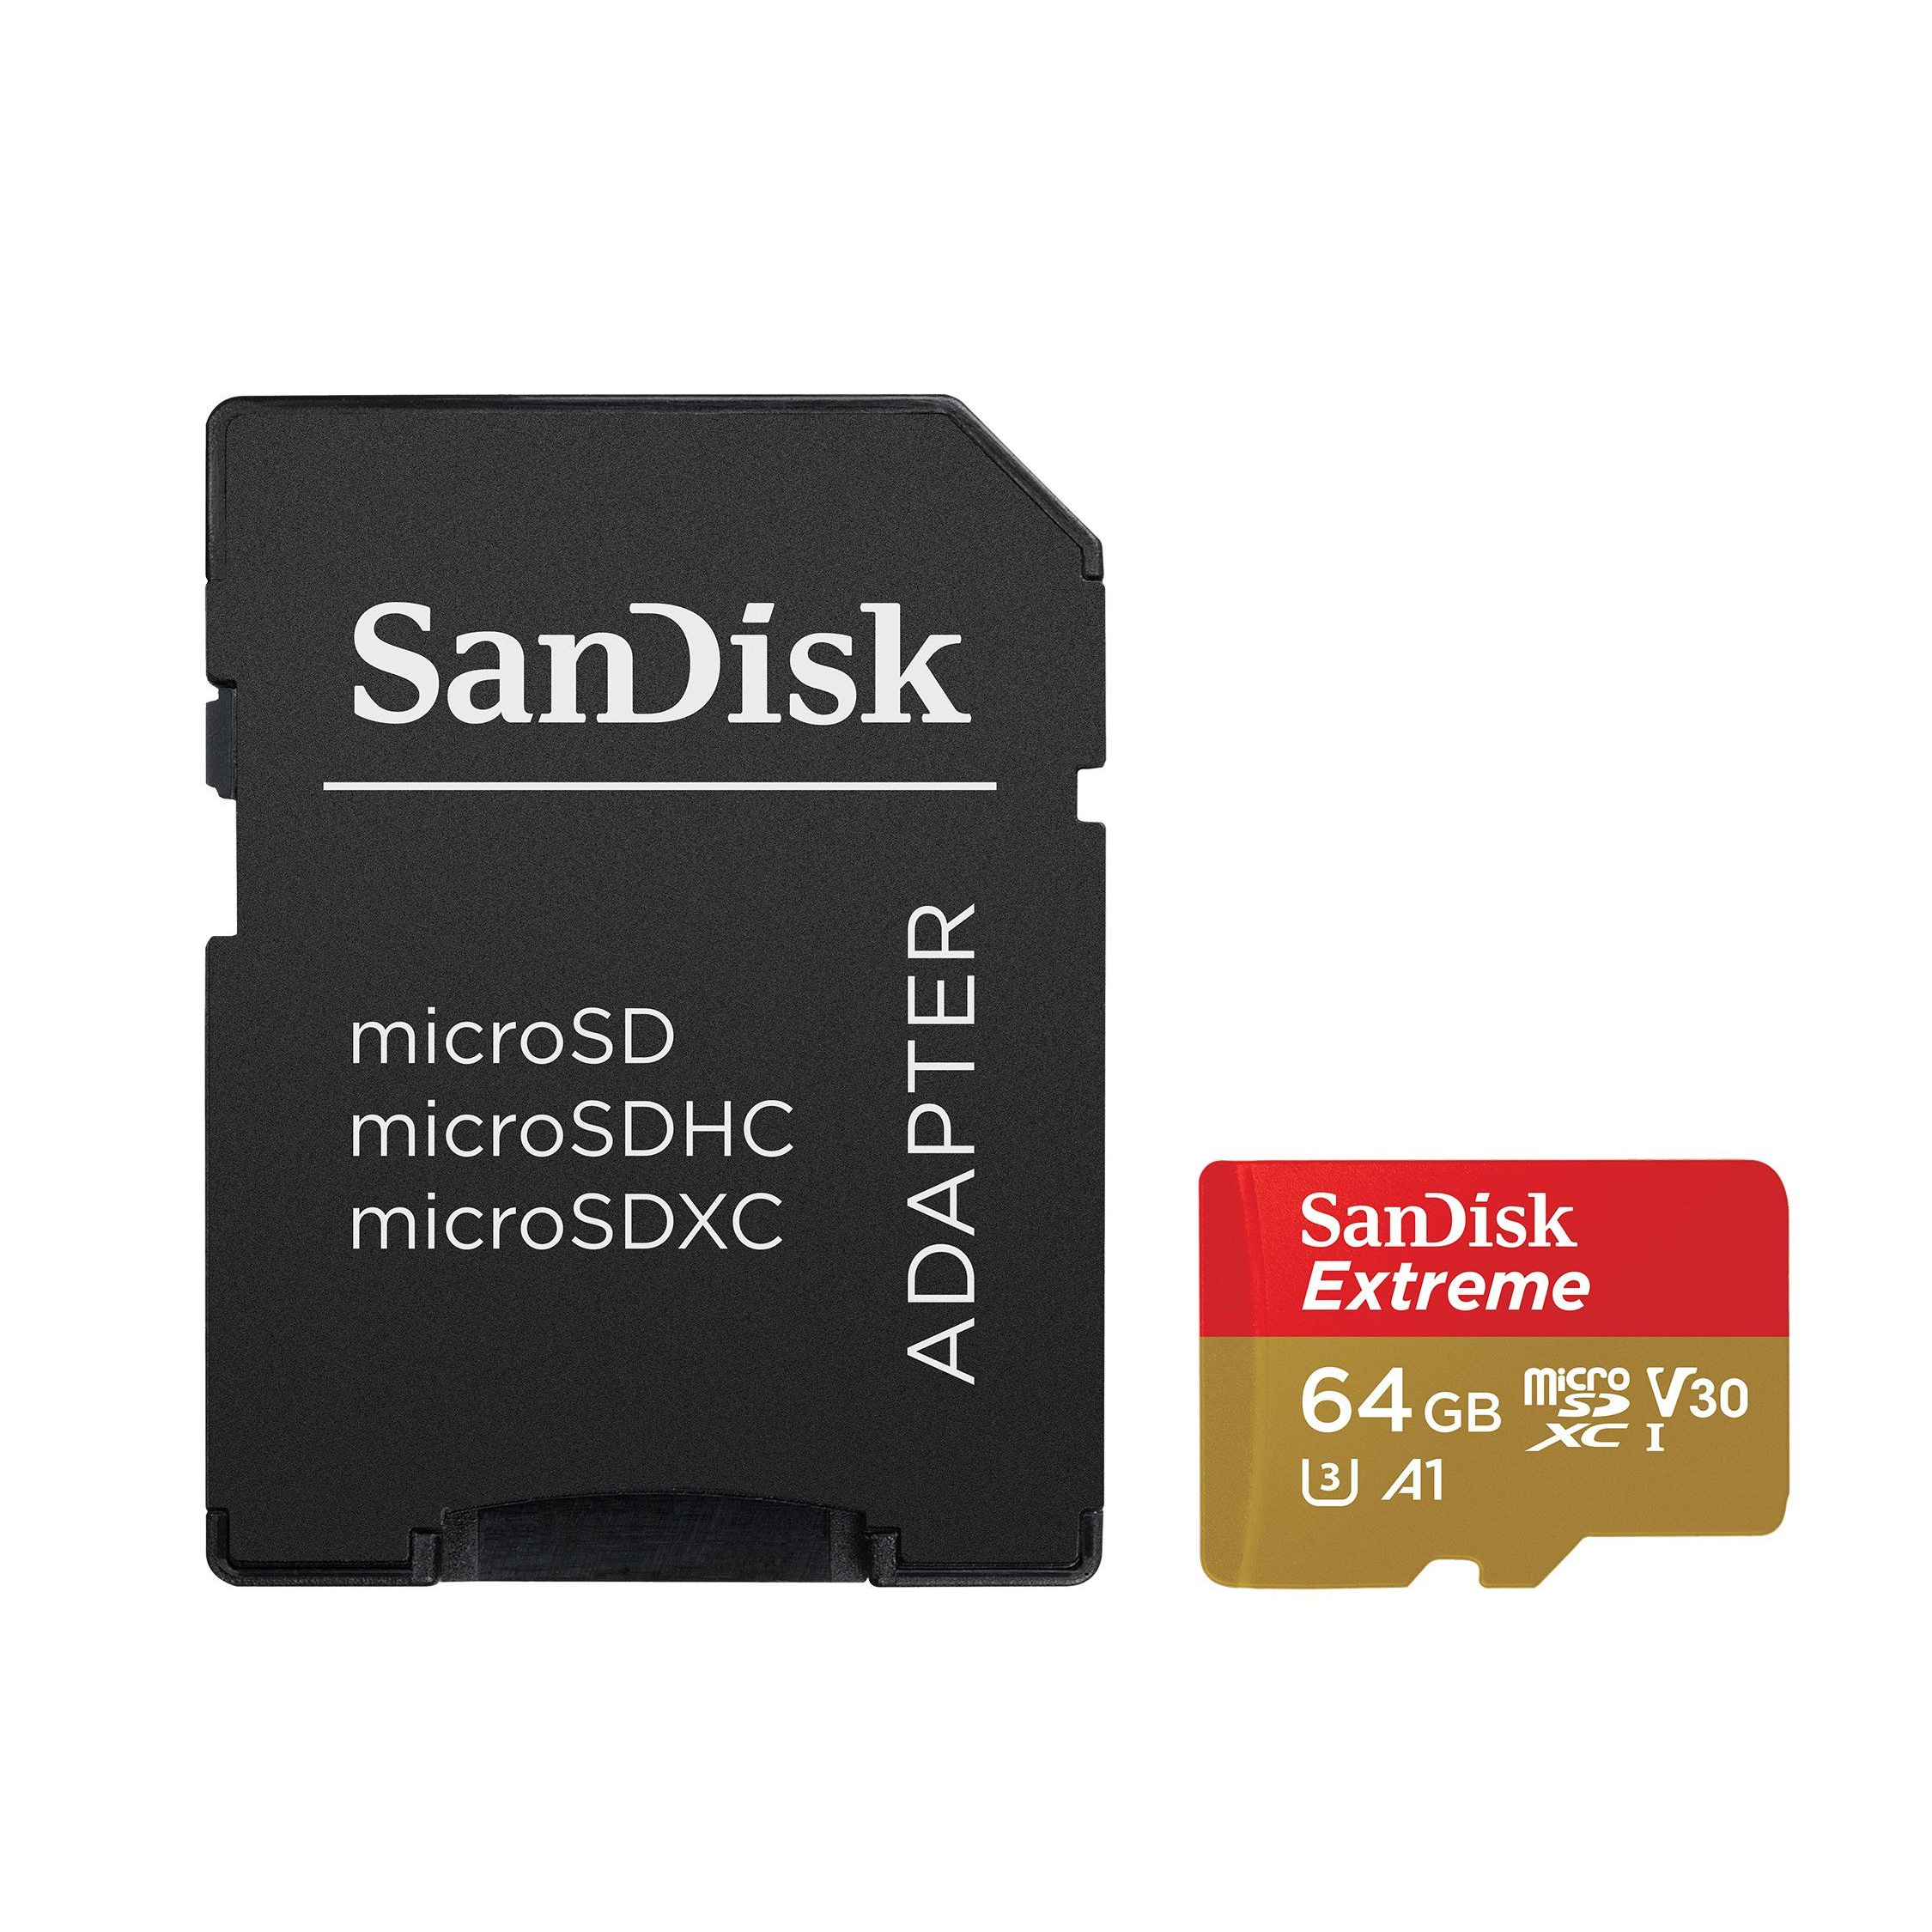 Original SanDisk Extreme Class 10 64GB MicroSDHC Memory Card with SD Adaptor (SDSQXAF064GGN6MA)